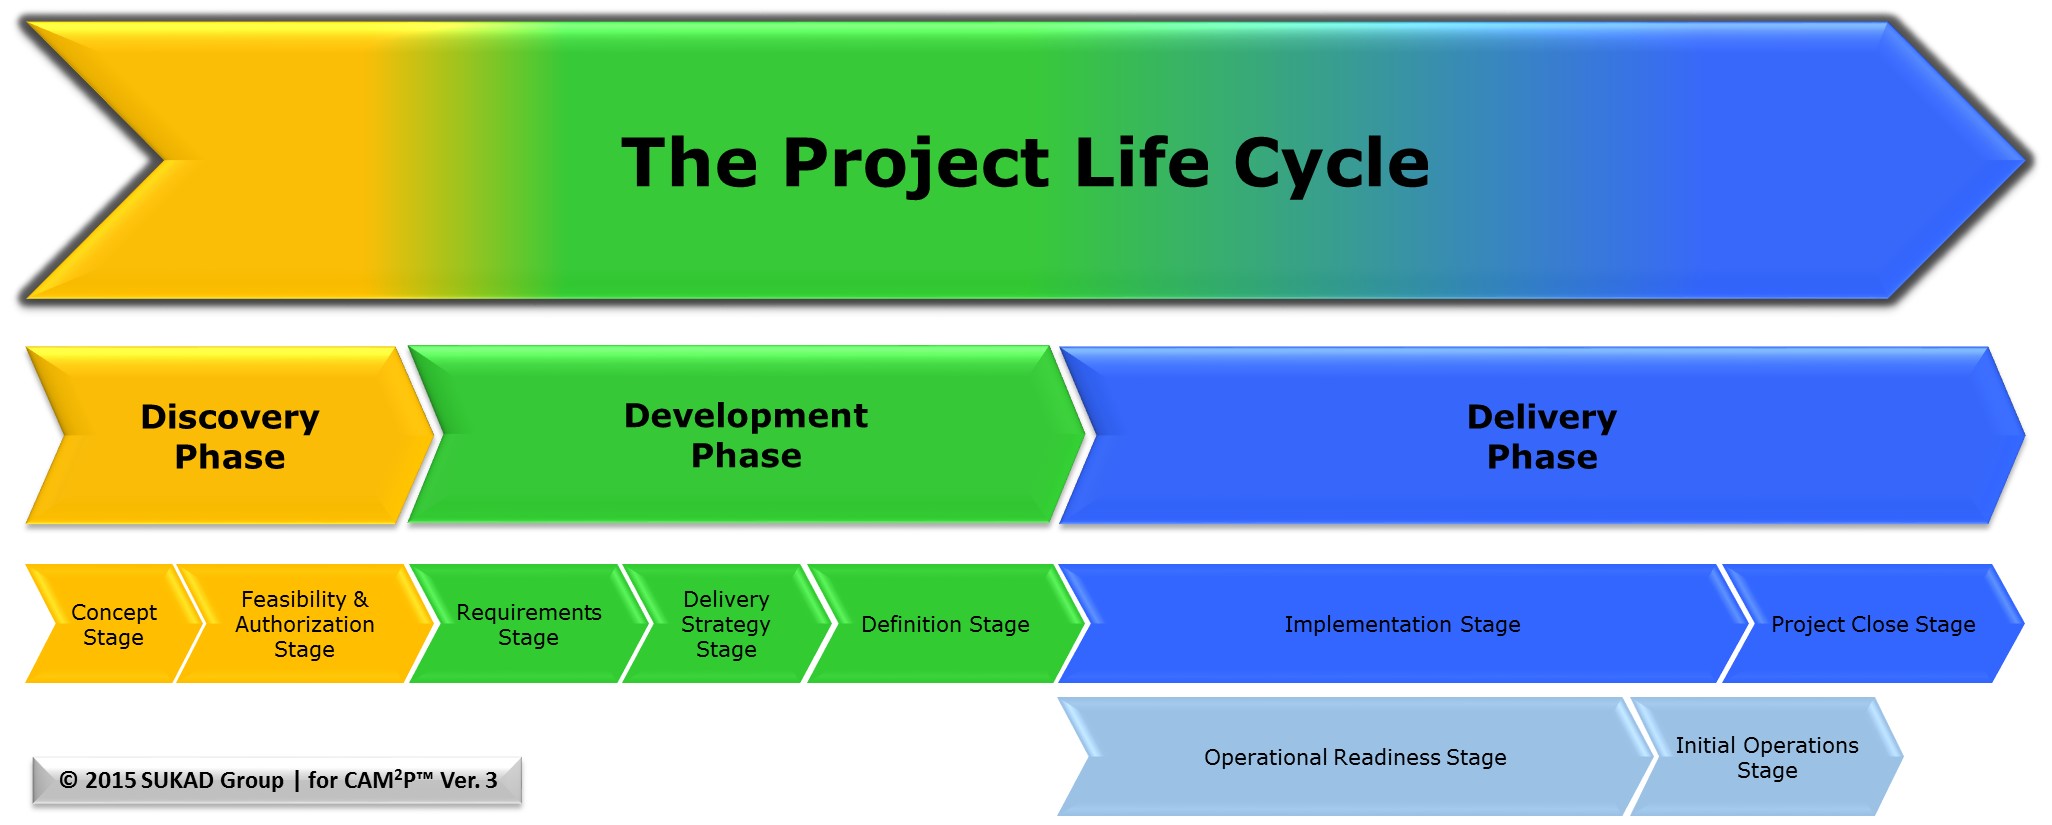 How to manage different types of projects?